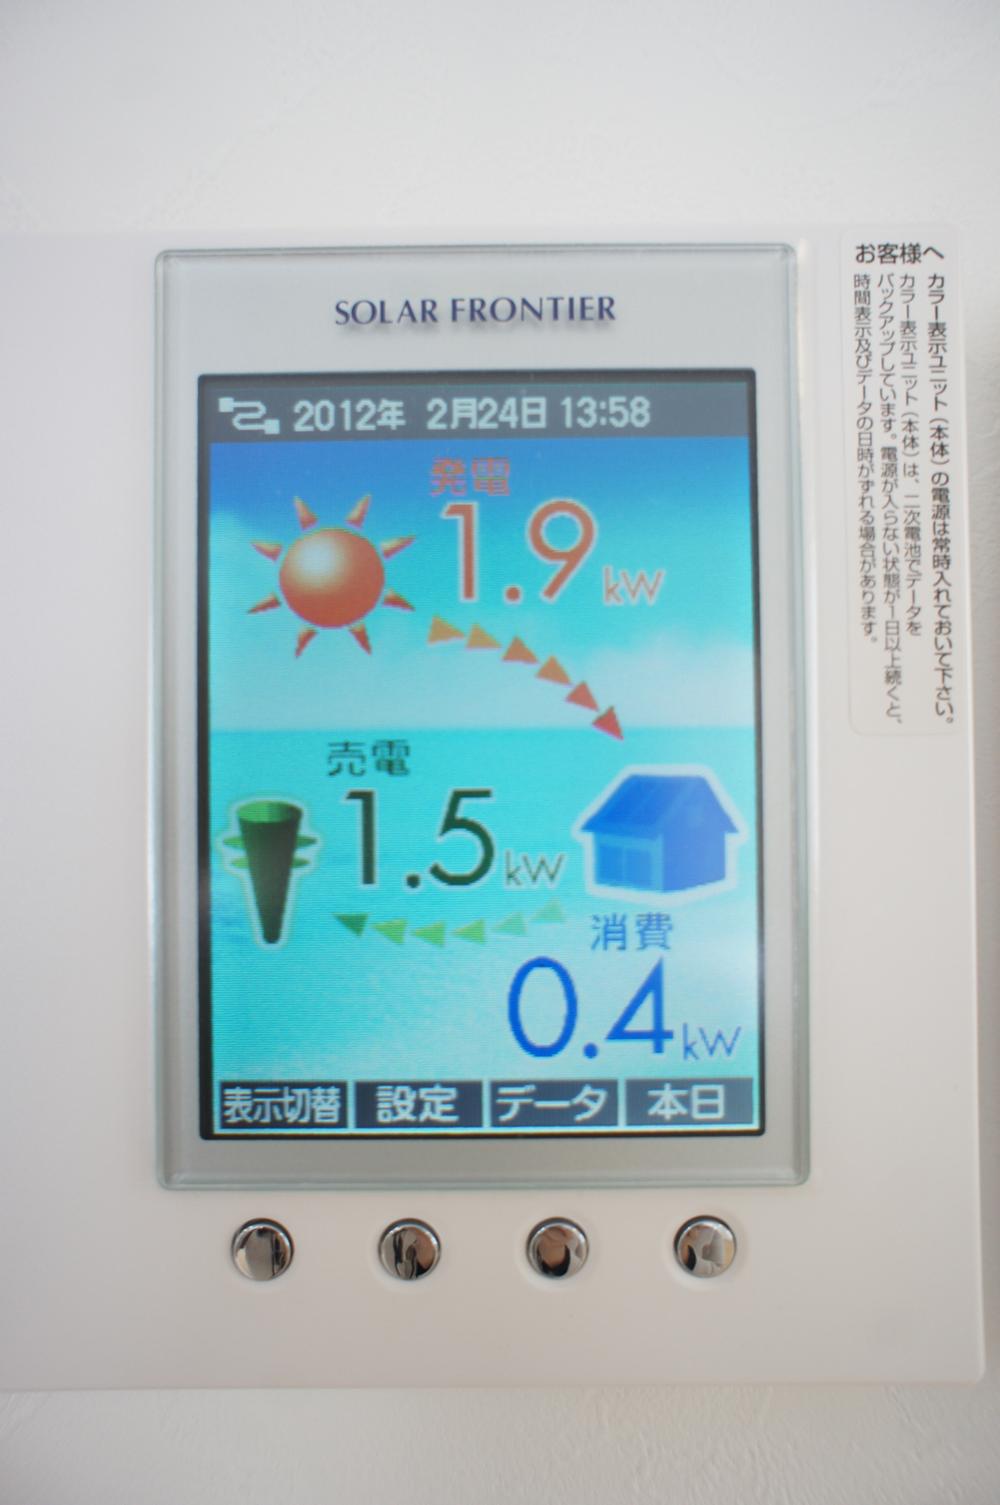 Other Equipment. Solar panel monitor that can check the daily amount of power generation